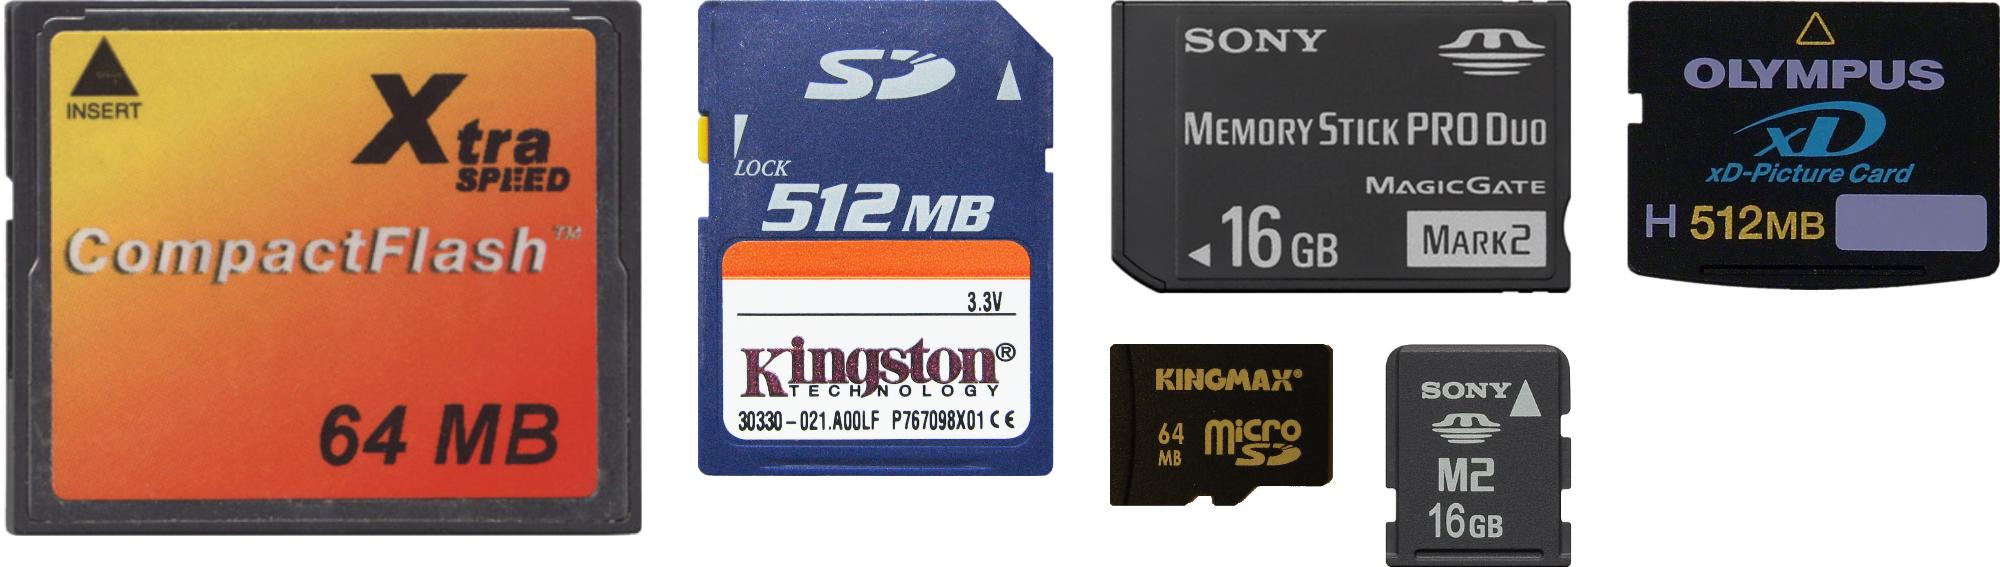 1994 - Compact Flash made flash data storage possible.